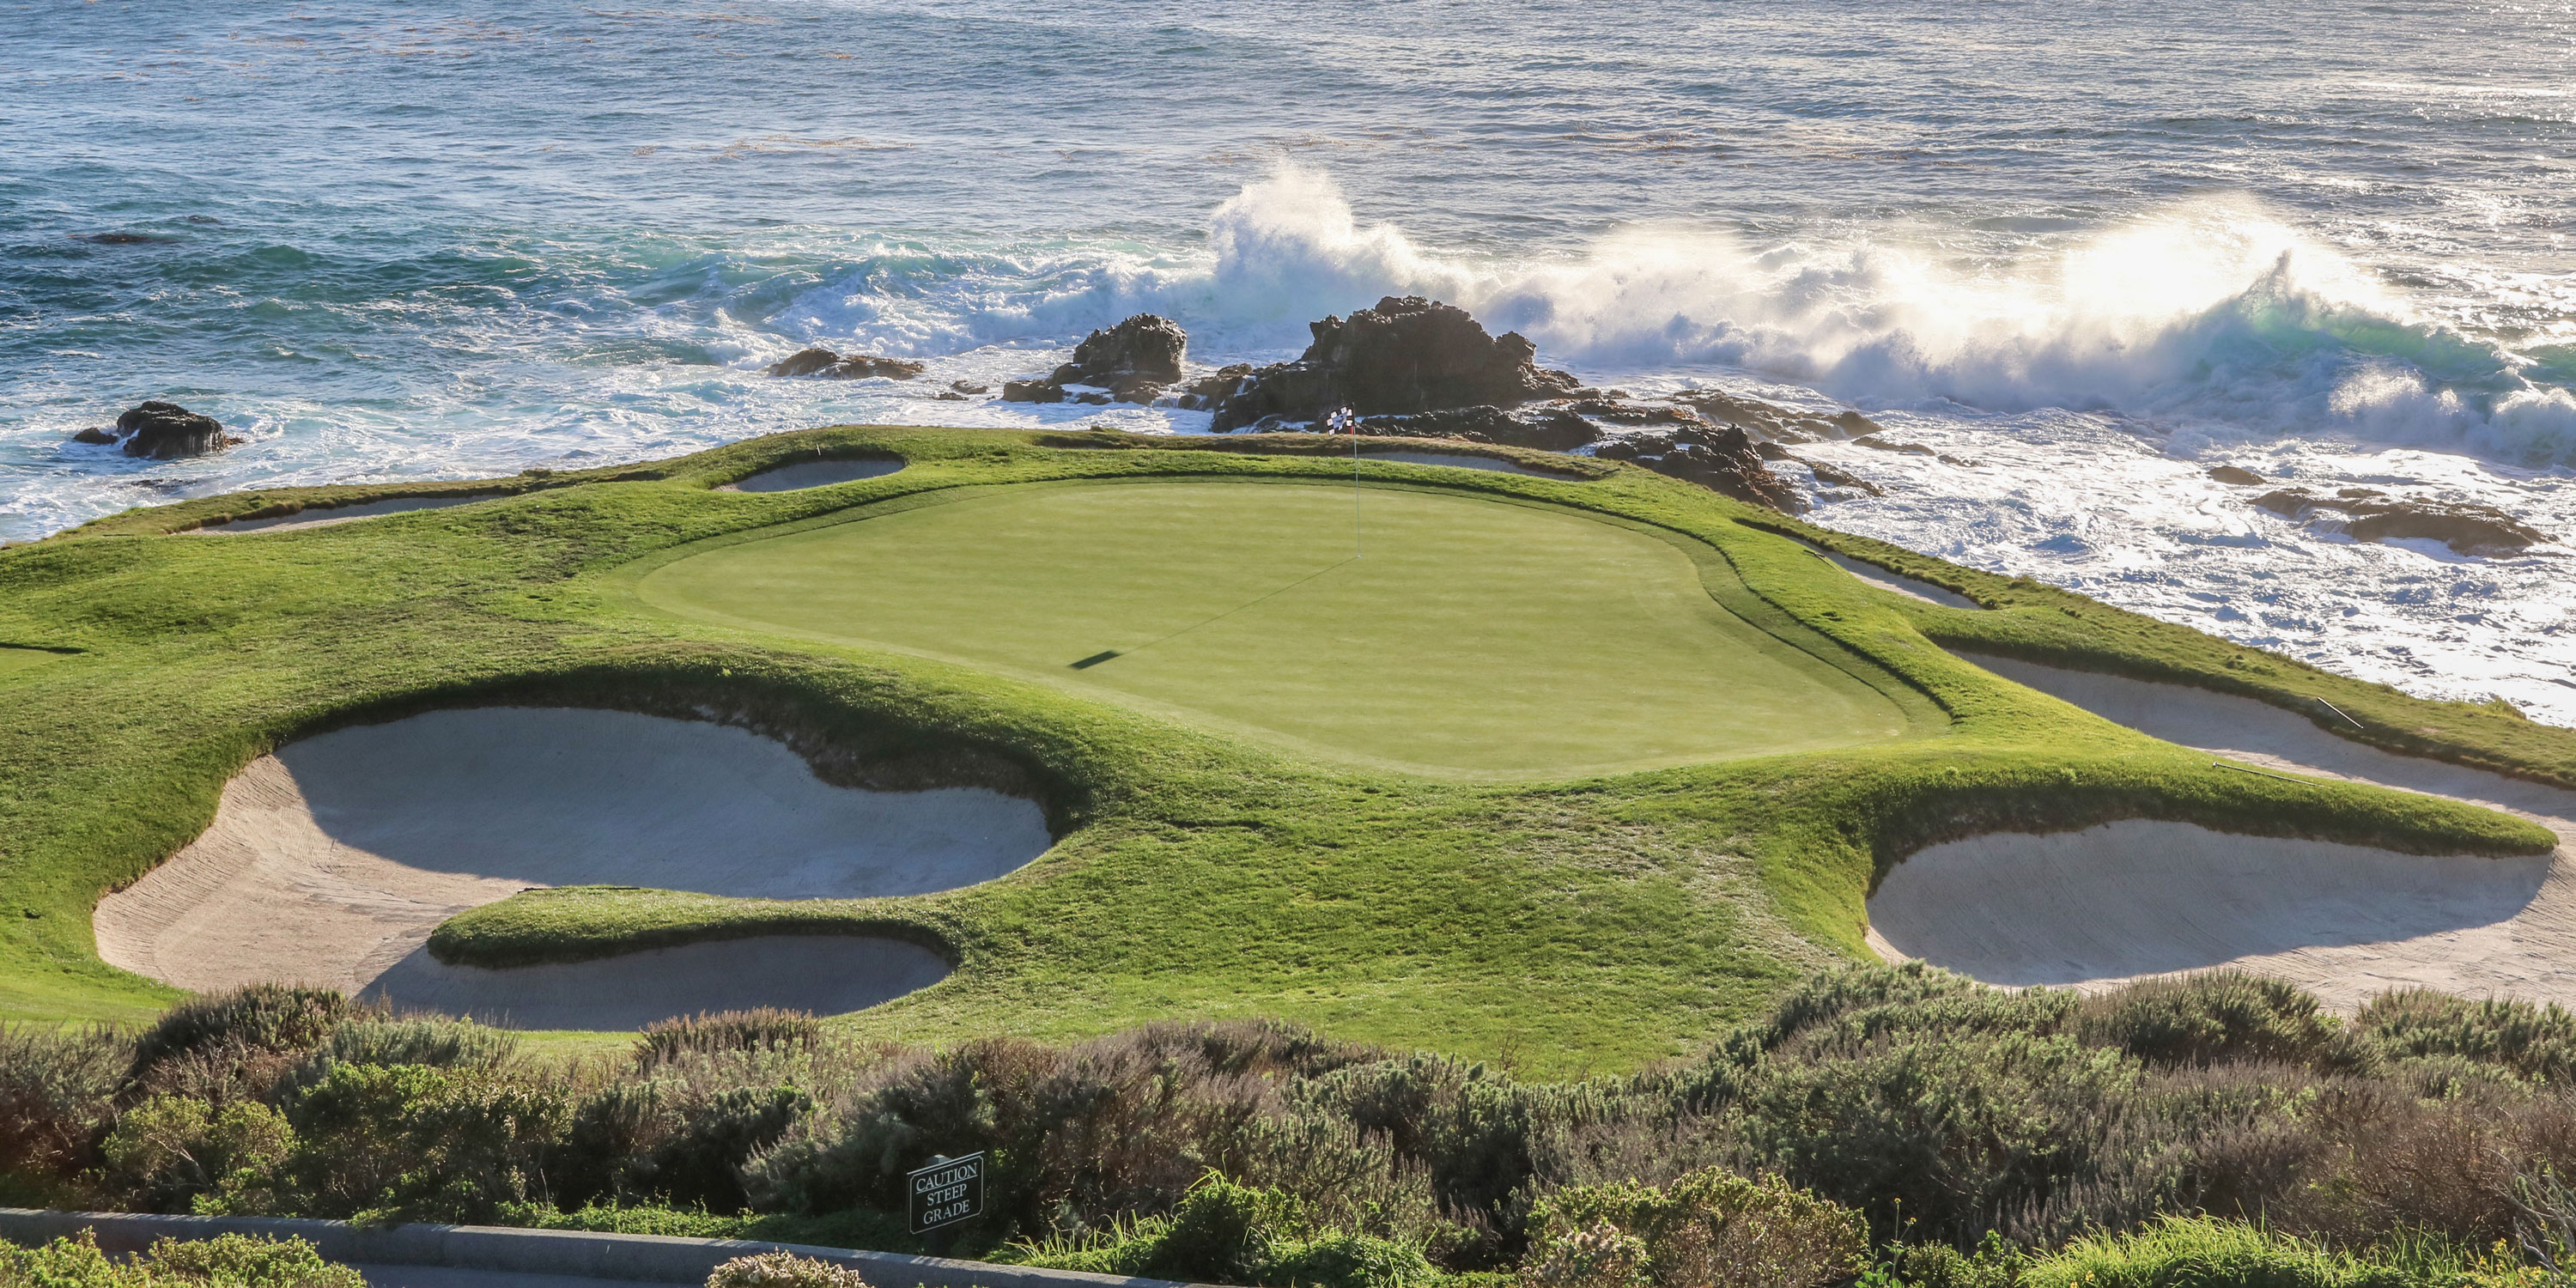 What's your favorite hole at Pebble Beach? We asked more than a dozen